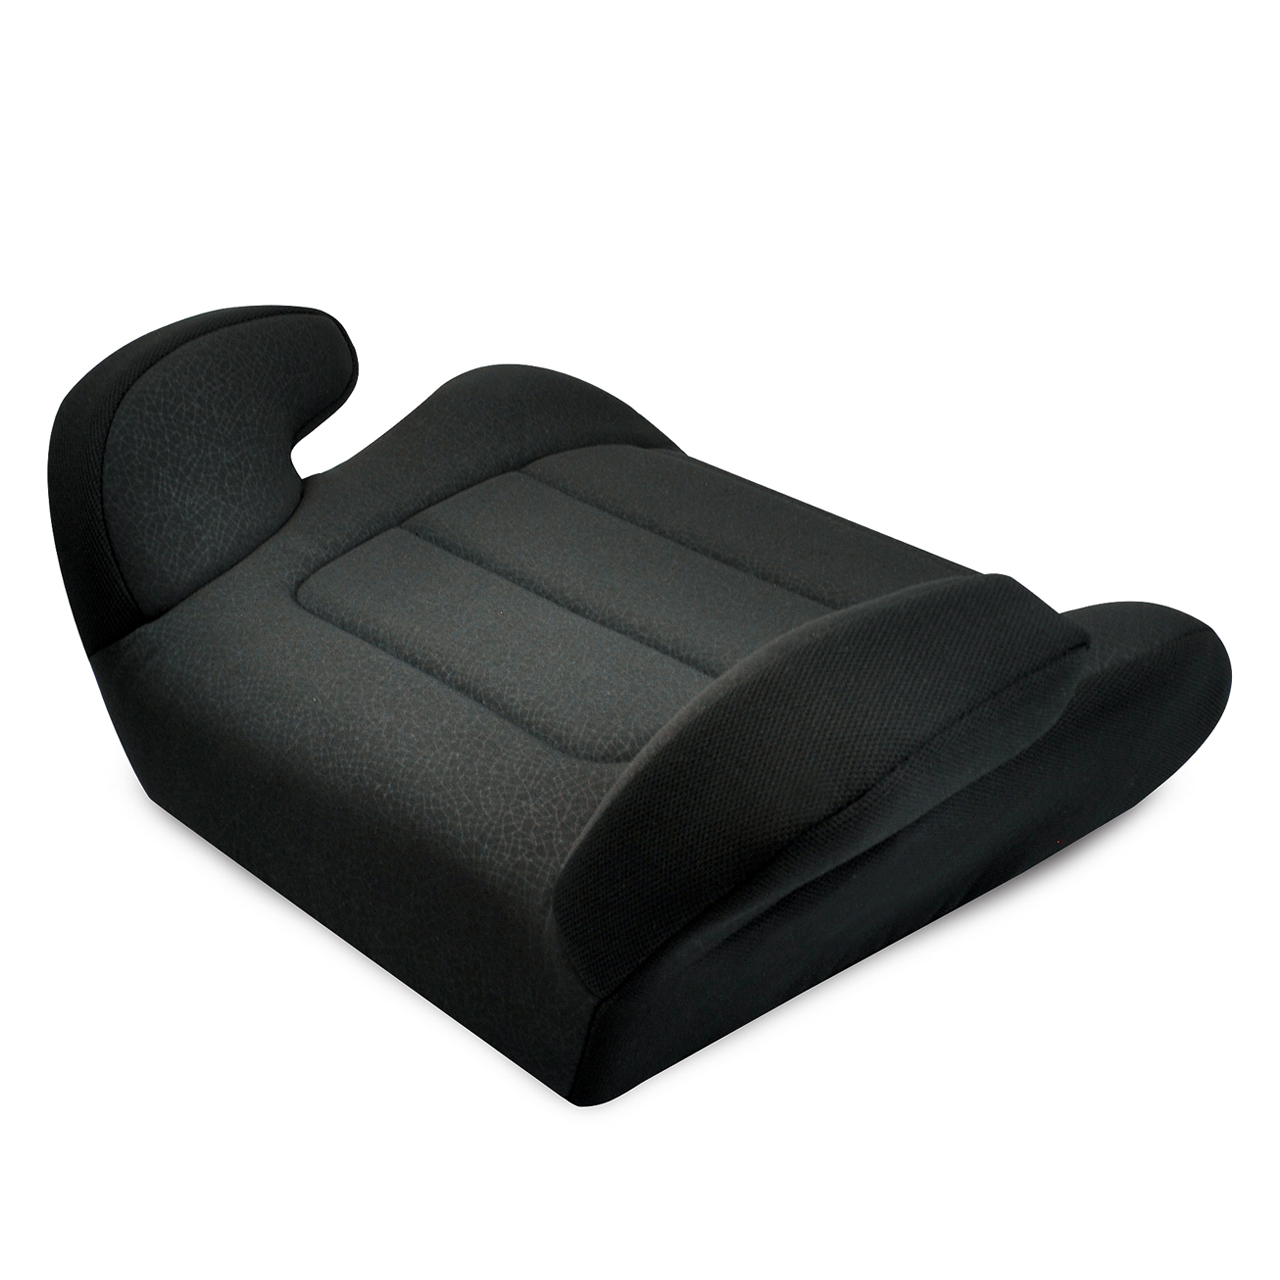 Harmony Juvenile Youth Backless Booster Car Seat, Black - image 3 of 7